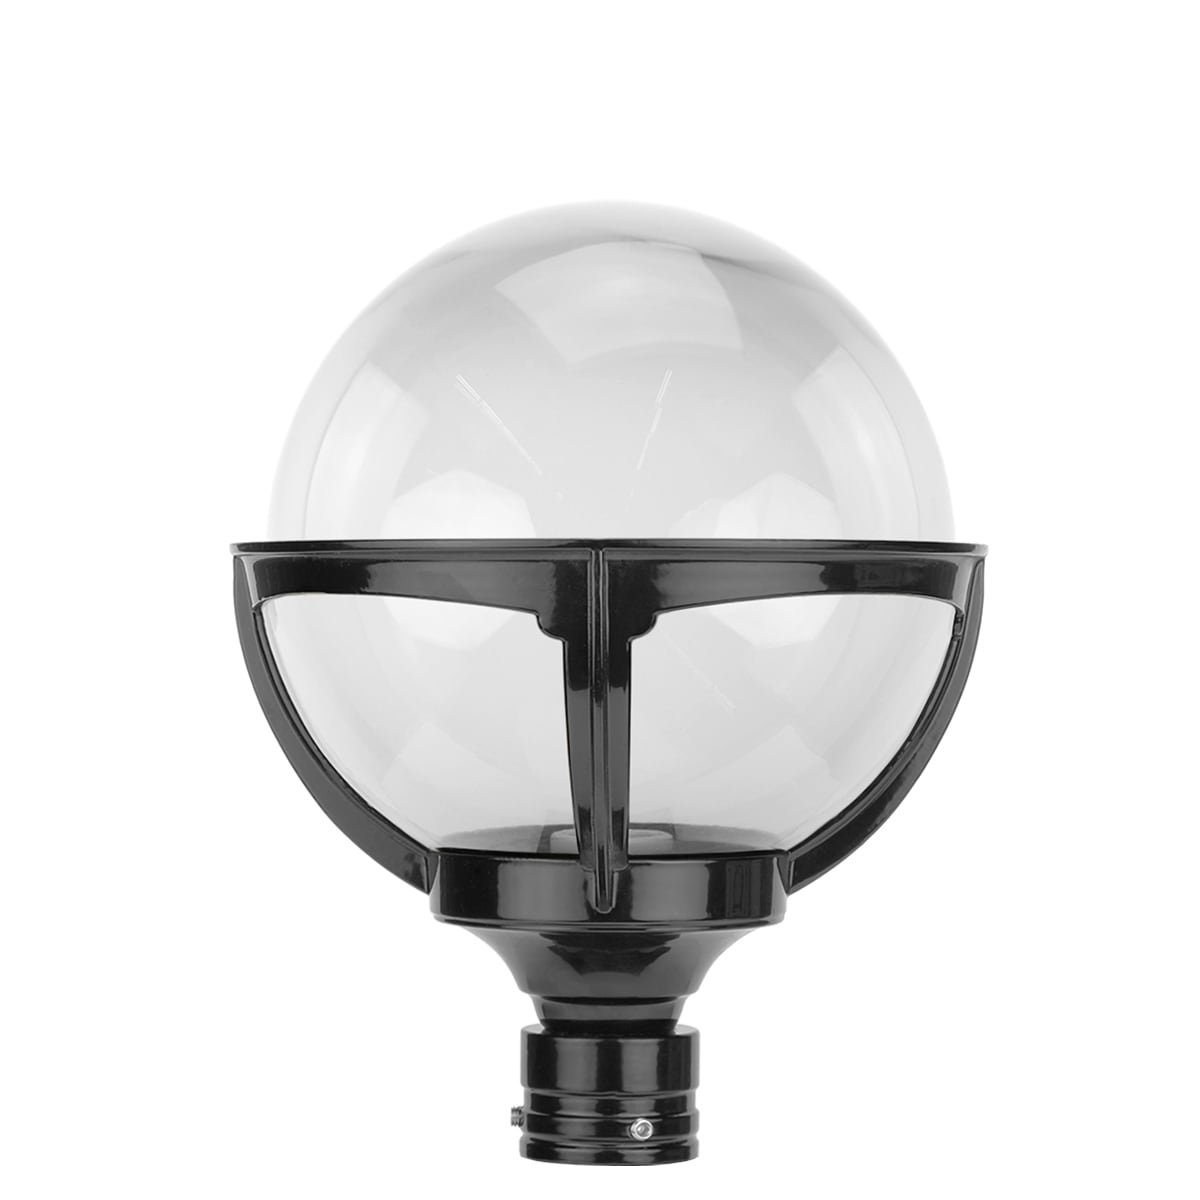 Loose lampshade sphere clear glass - Ø 25 cm